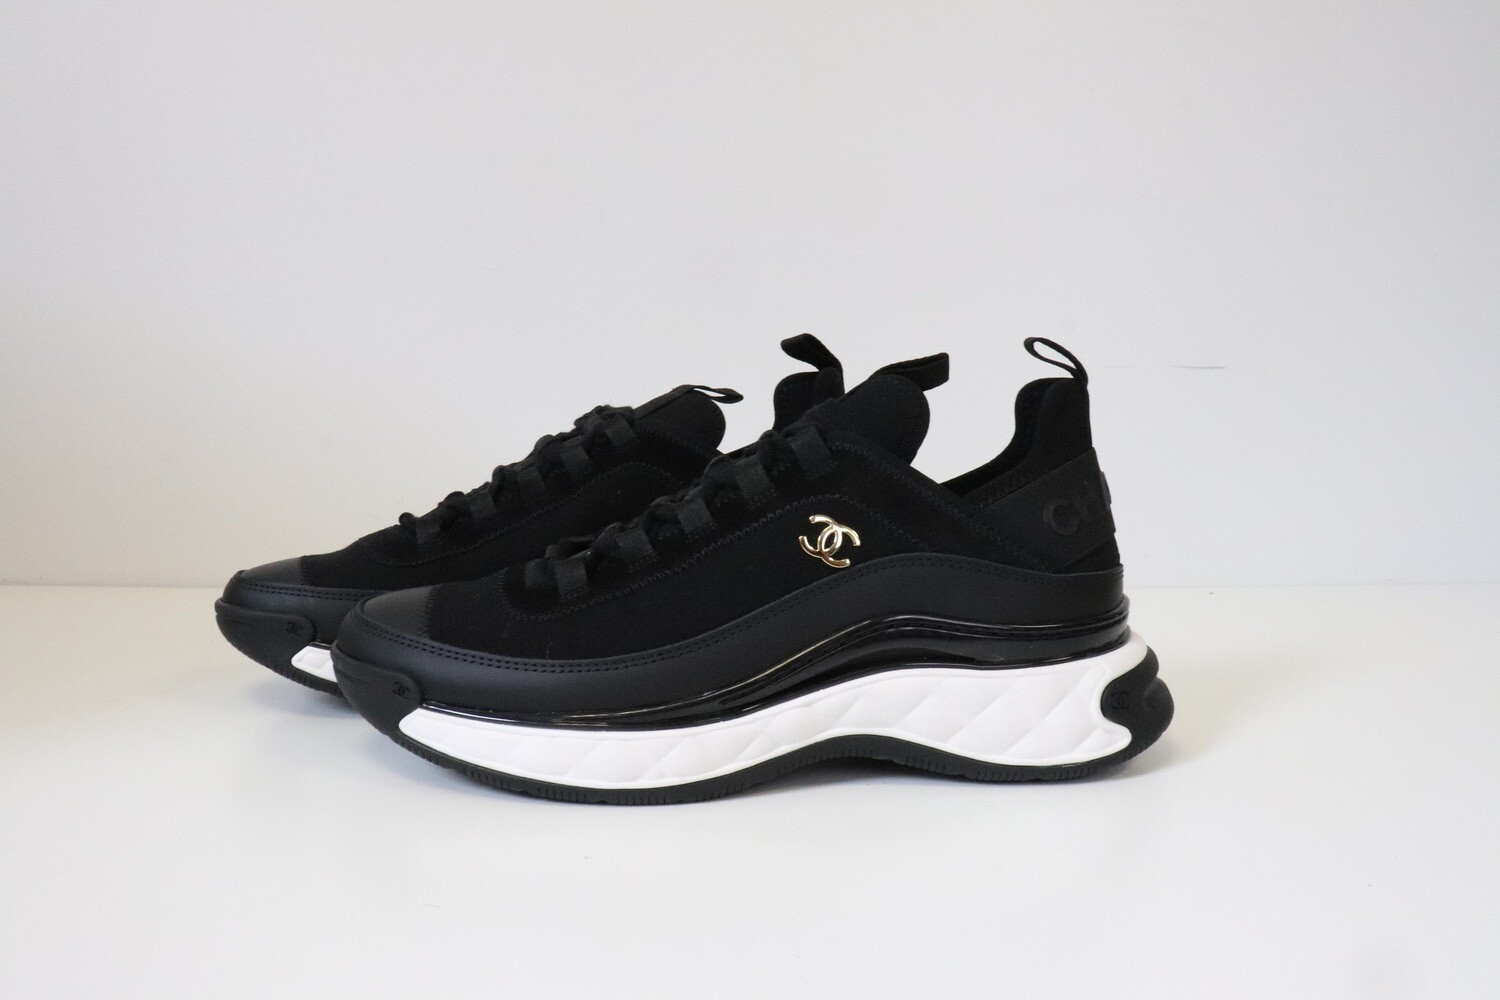 Chanel Sneakers Black and White, Size 40, New in Box WA001